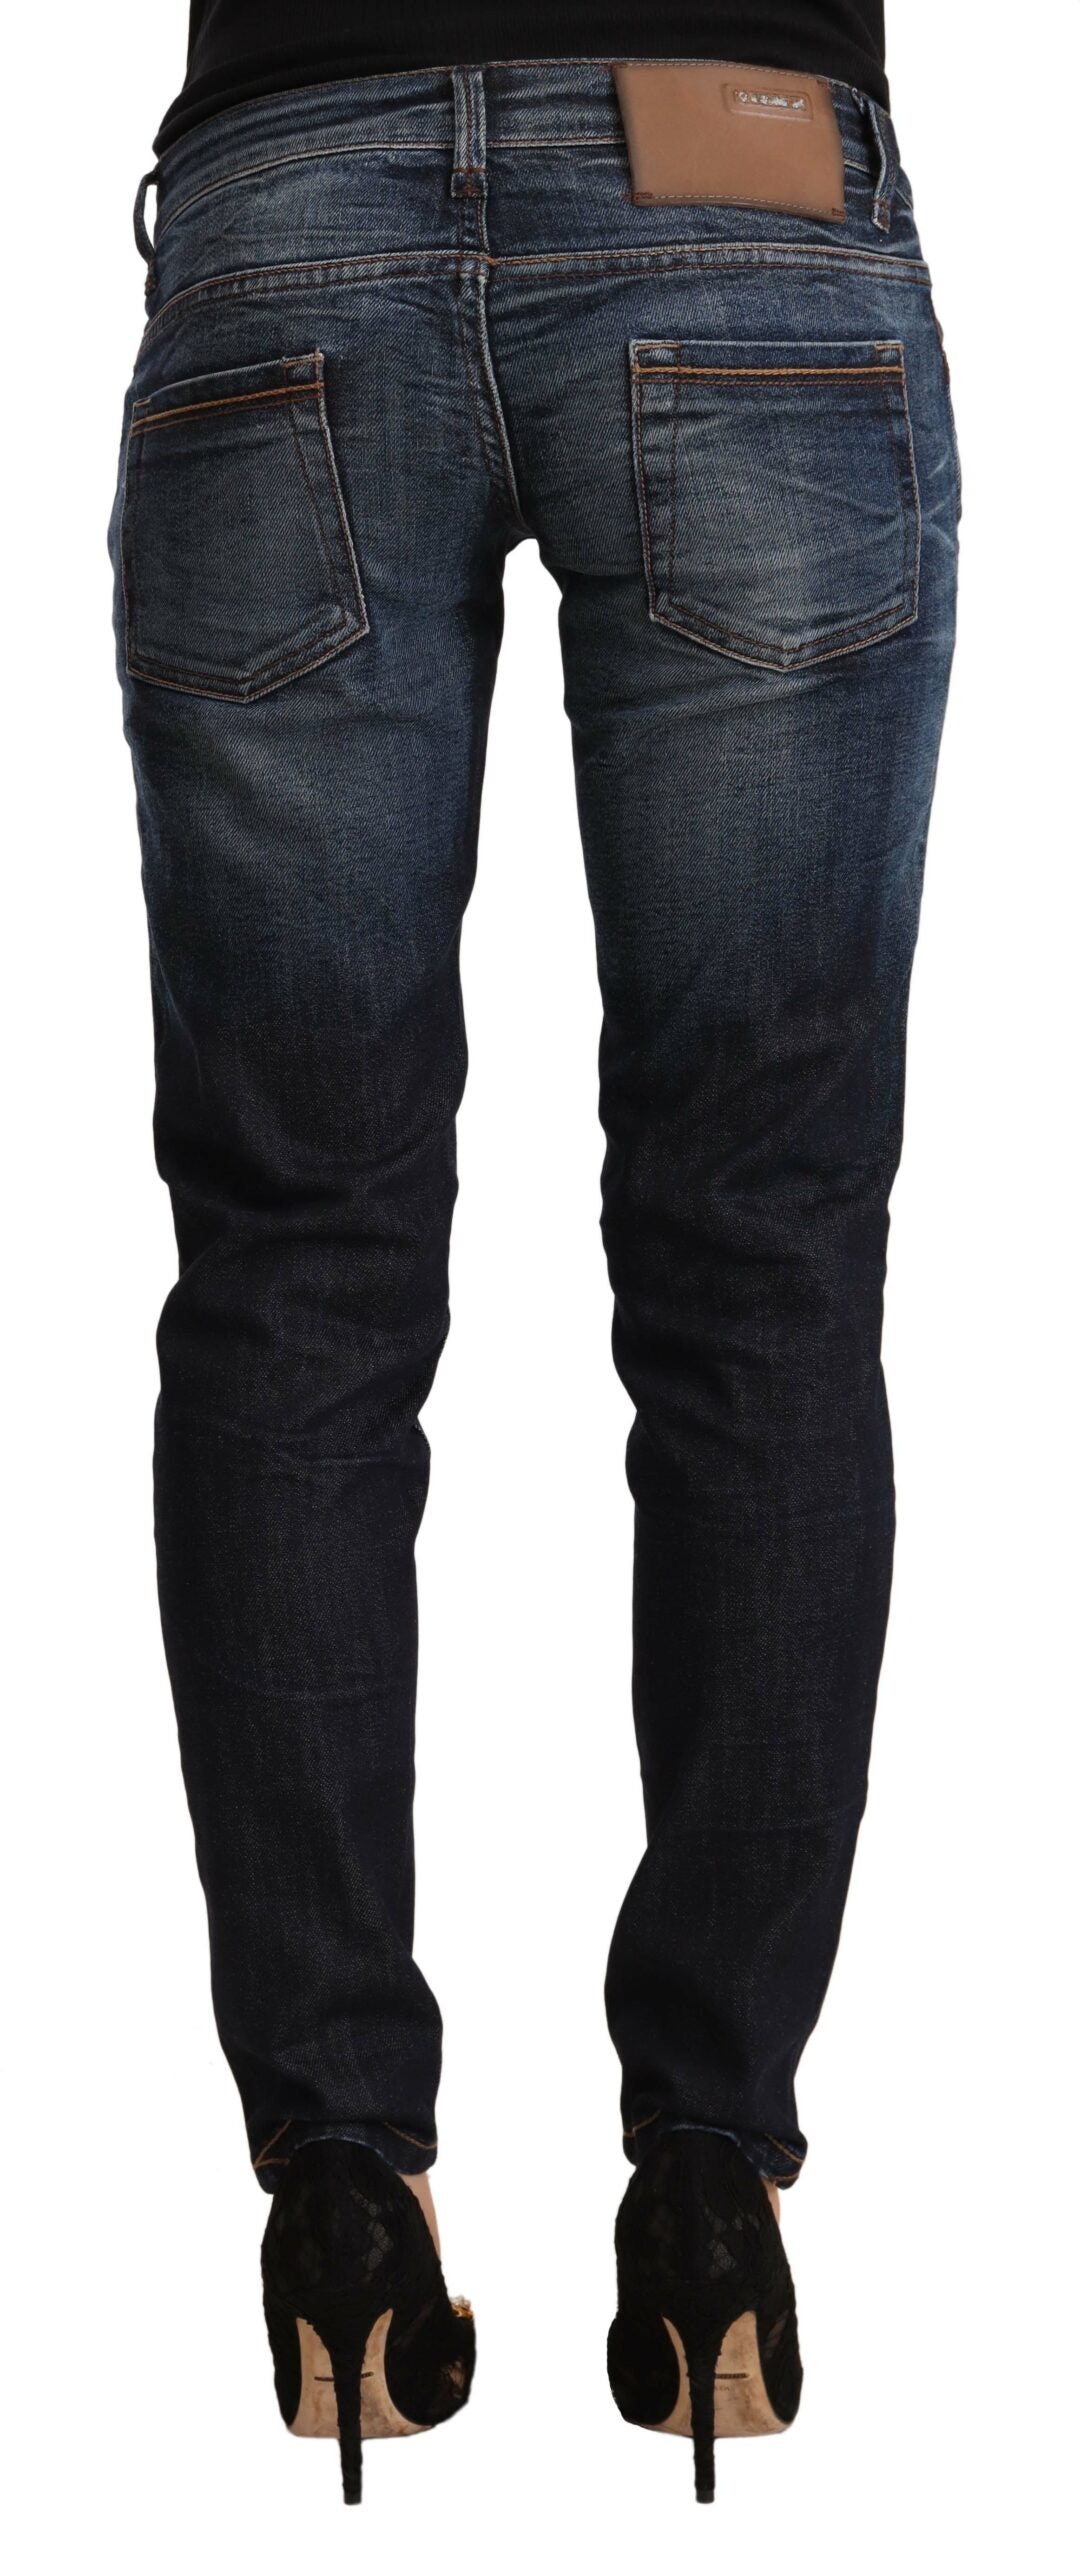 Chic Slim Fit Blue Washed Jeans